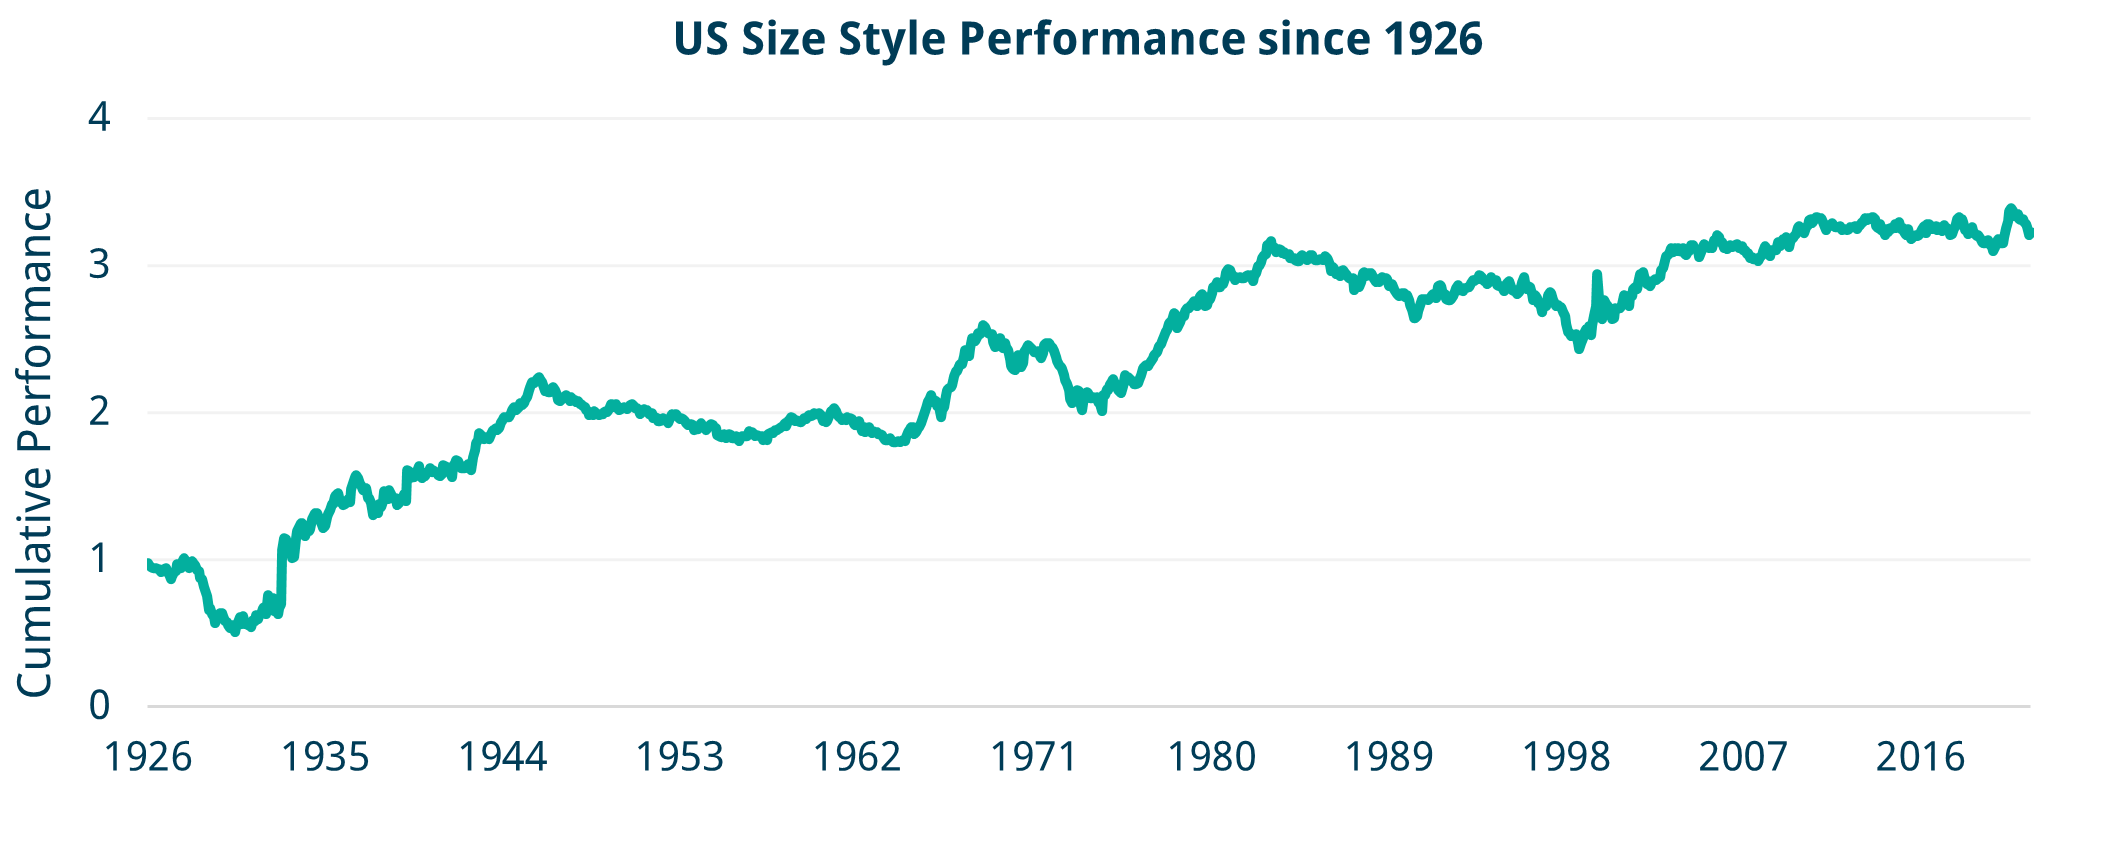 US Size Style Performance since 1926